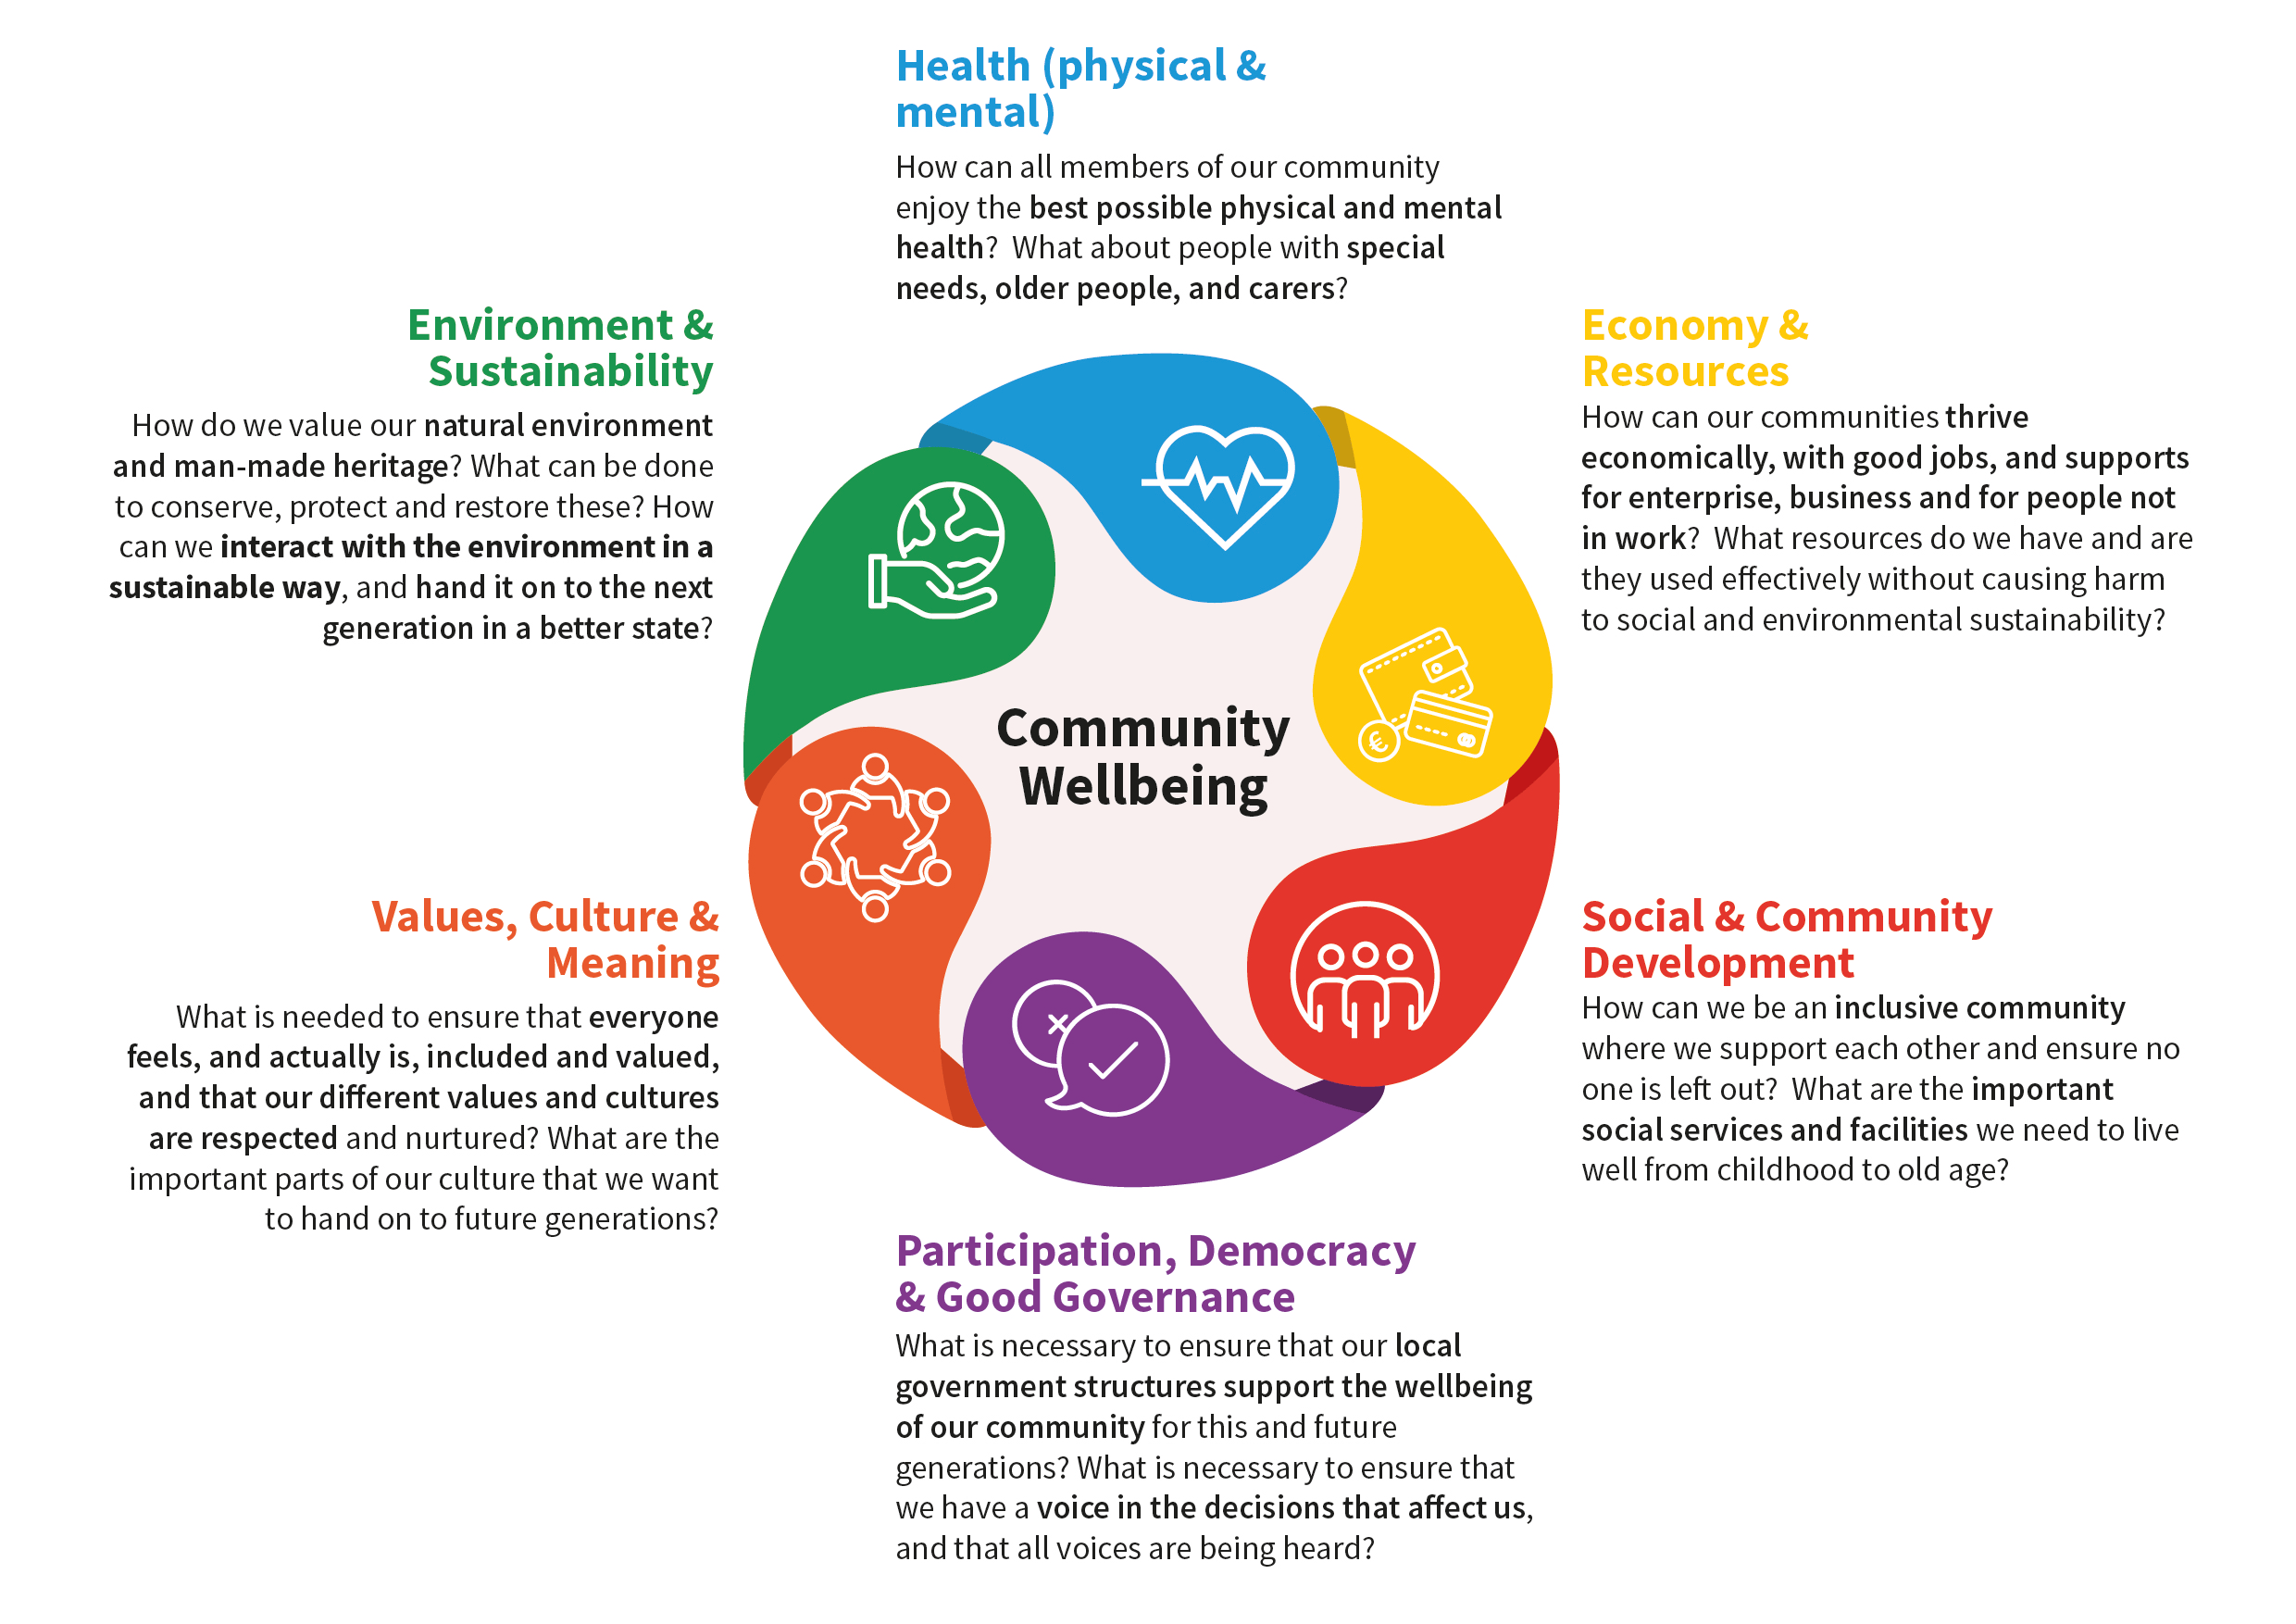 Workshops: A Future Community Wellbeing Vision for County Monaghan